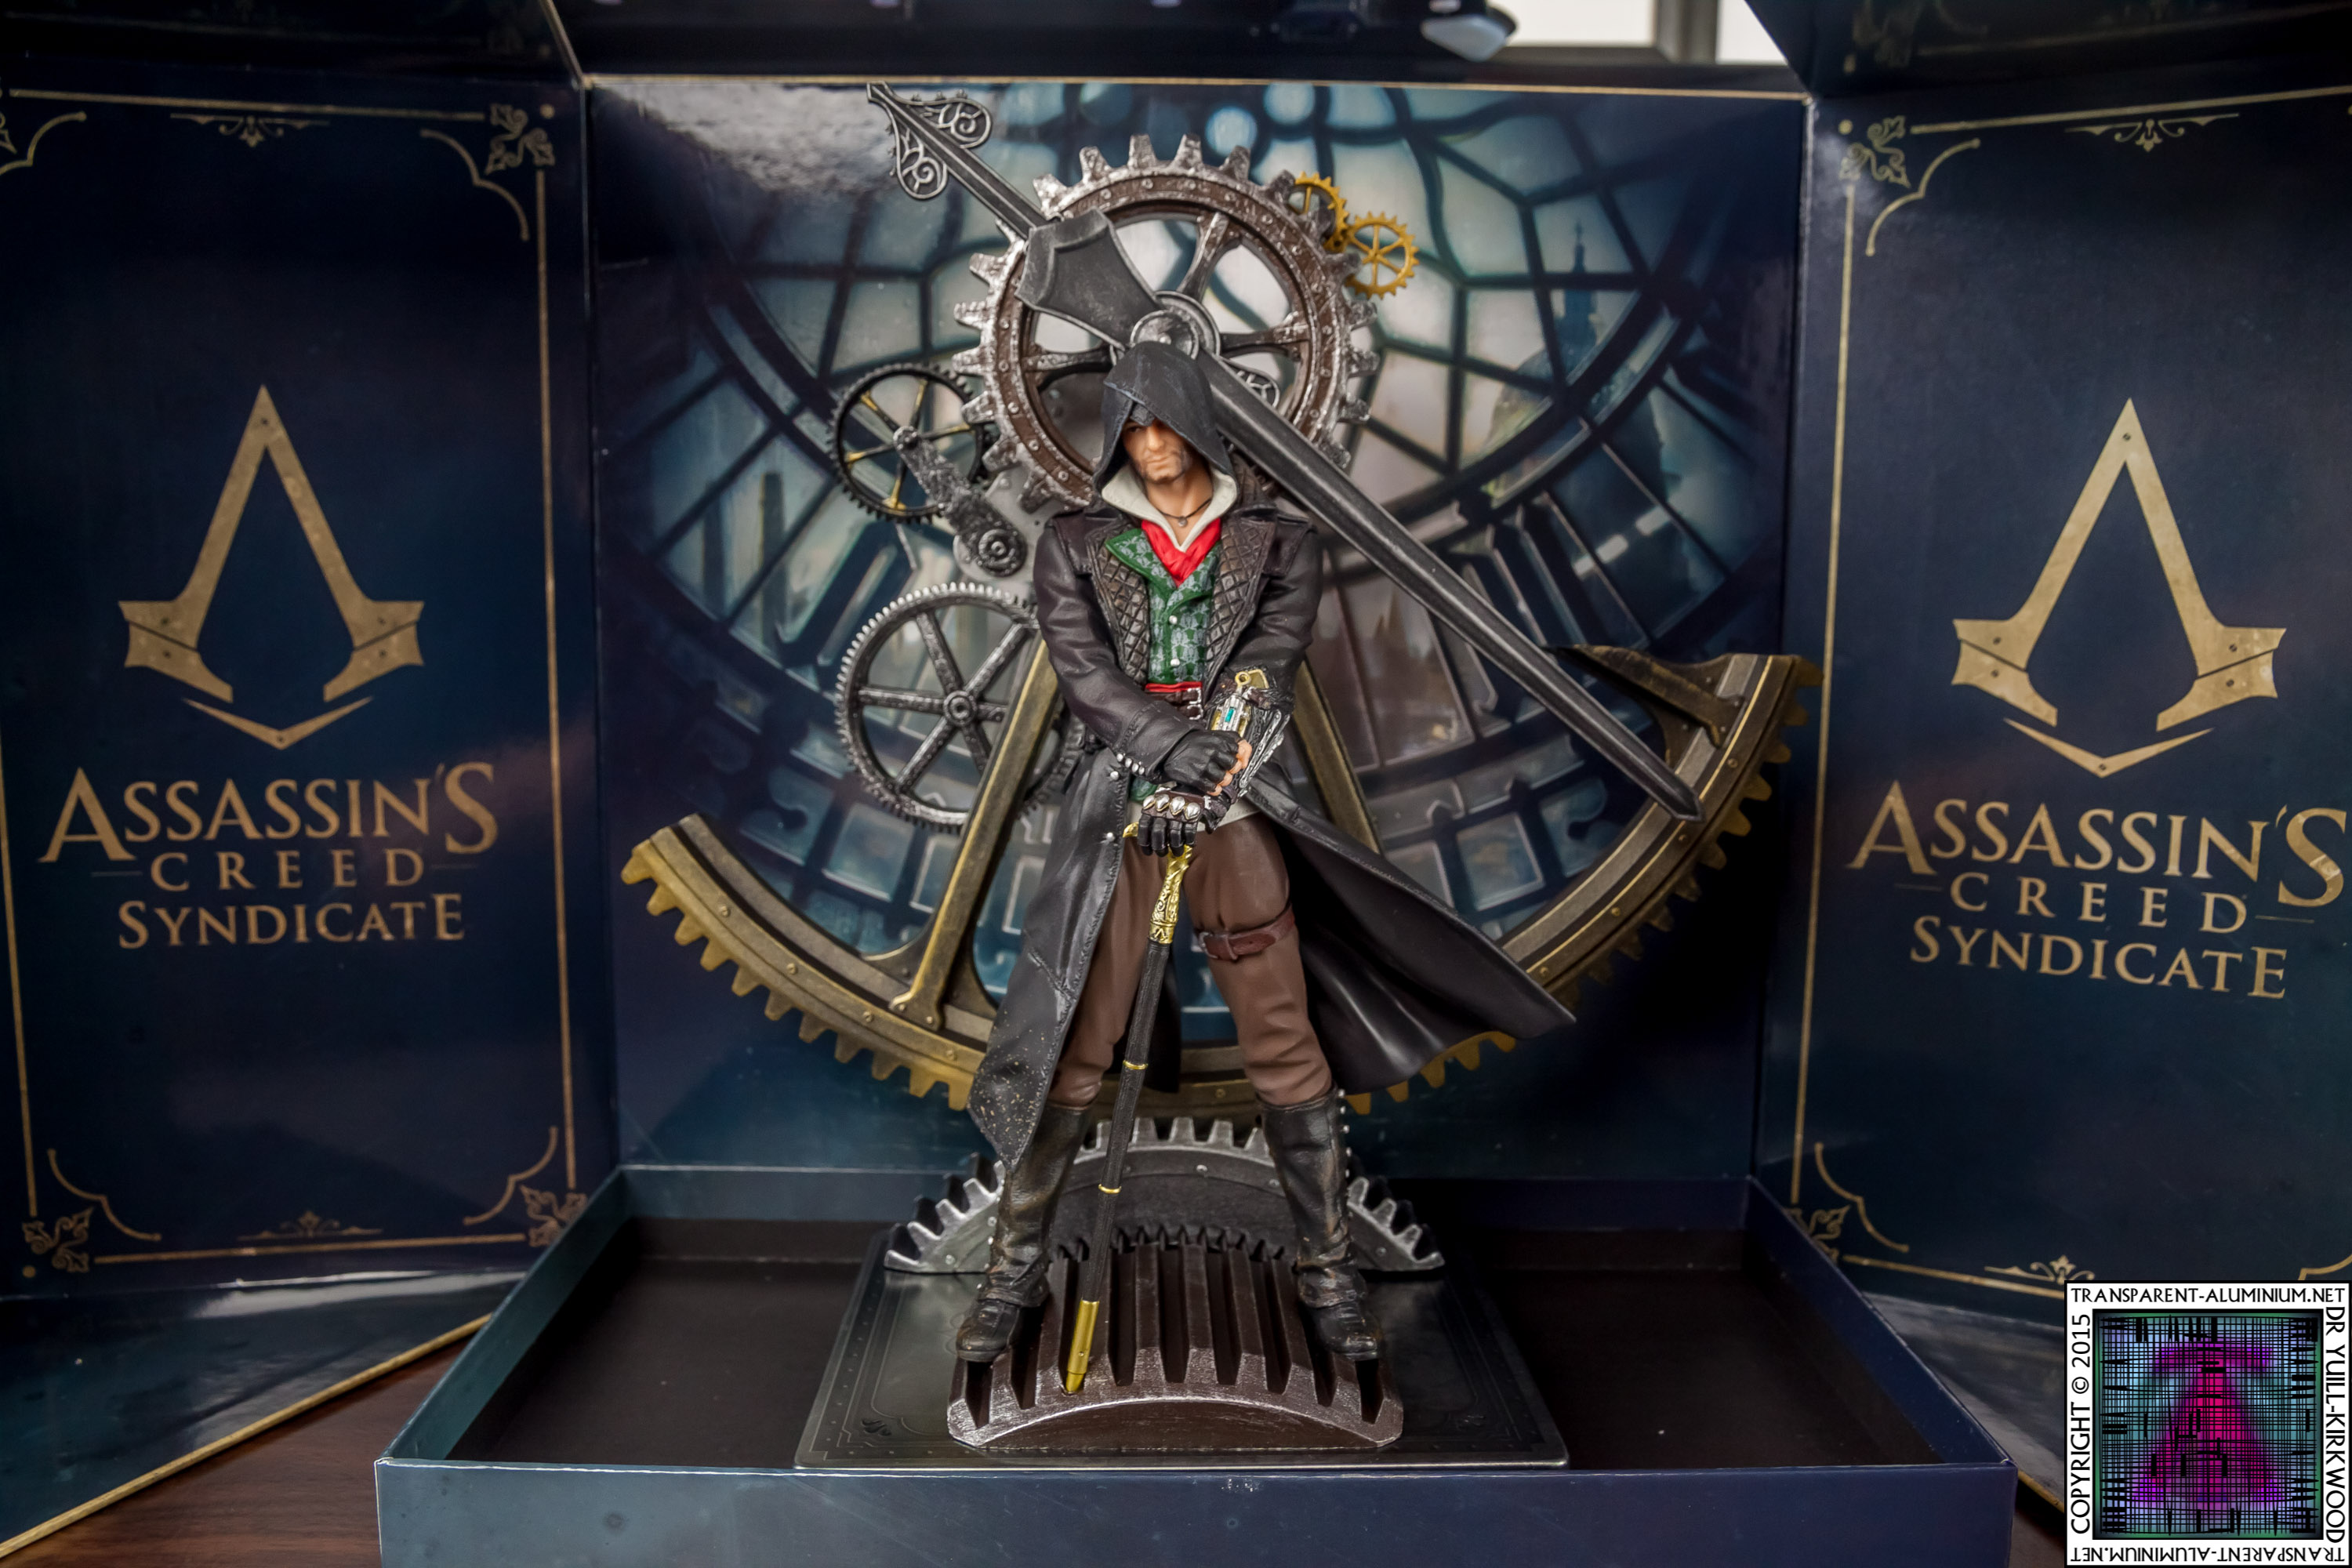 Assassins creed syndicate big ben edition